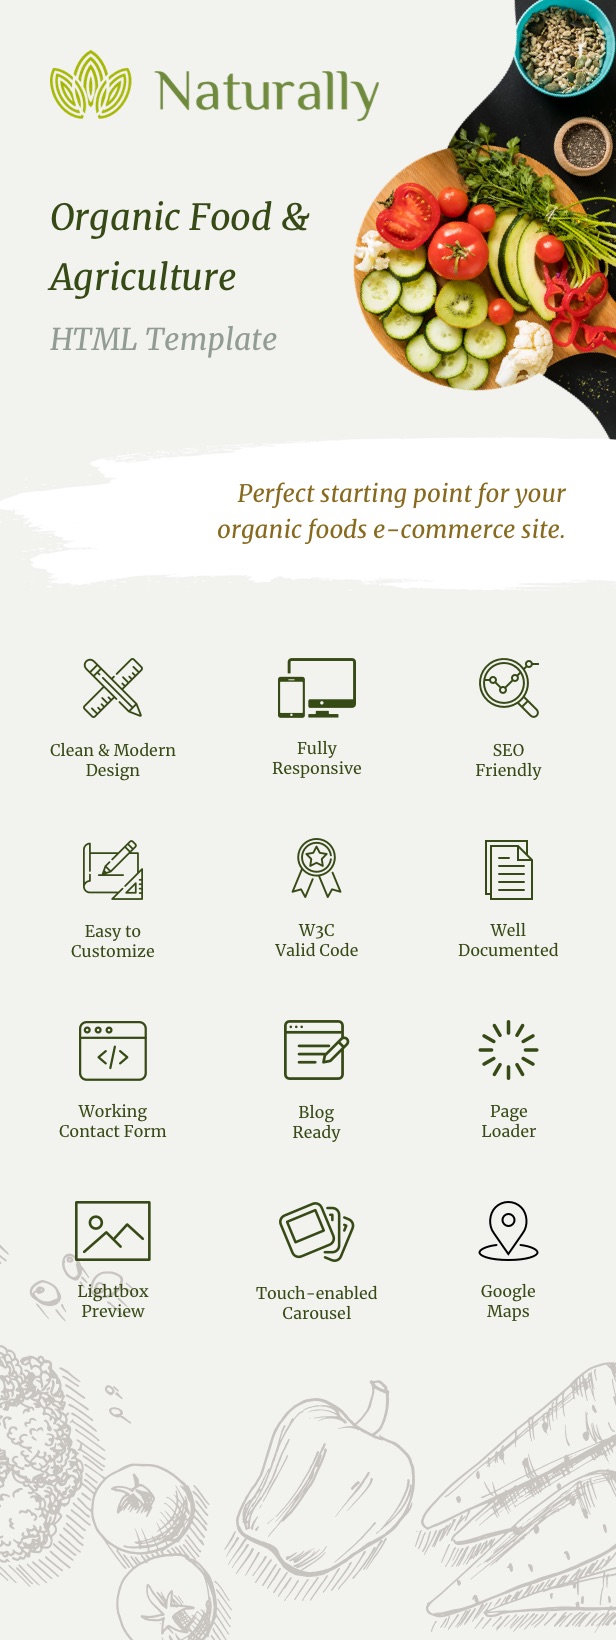 Naturally - Organic Food & Agriculture HTML Template